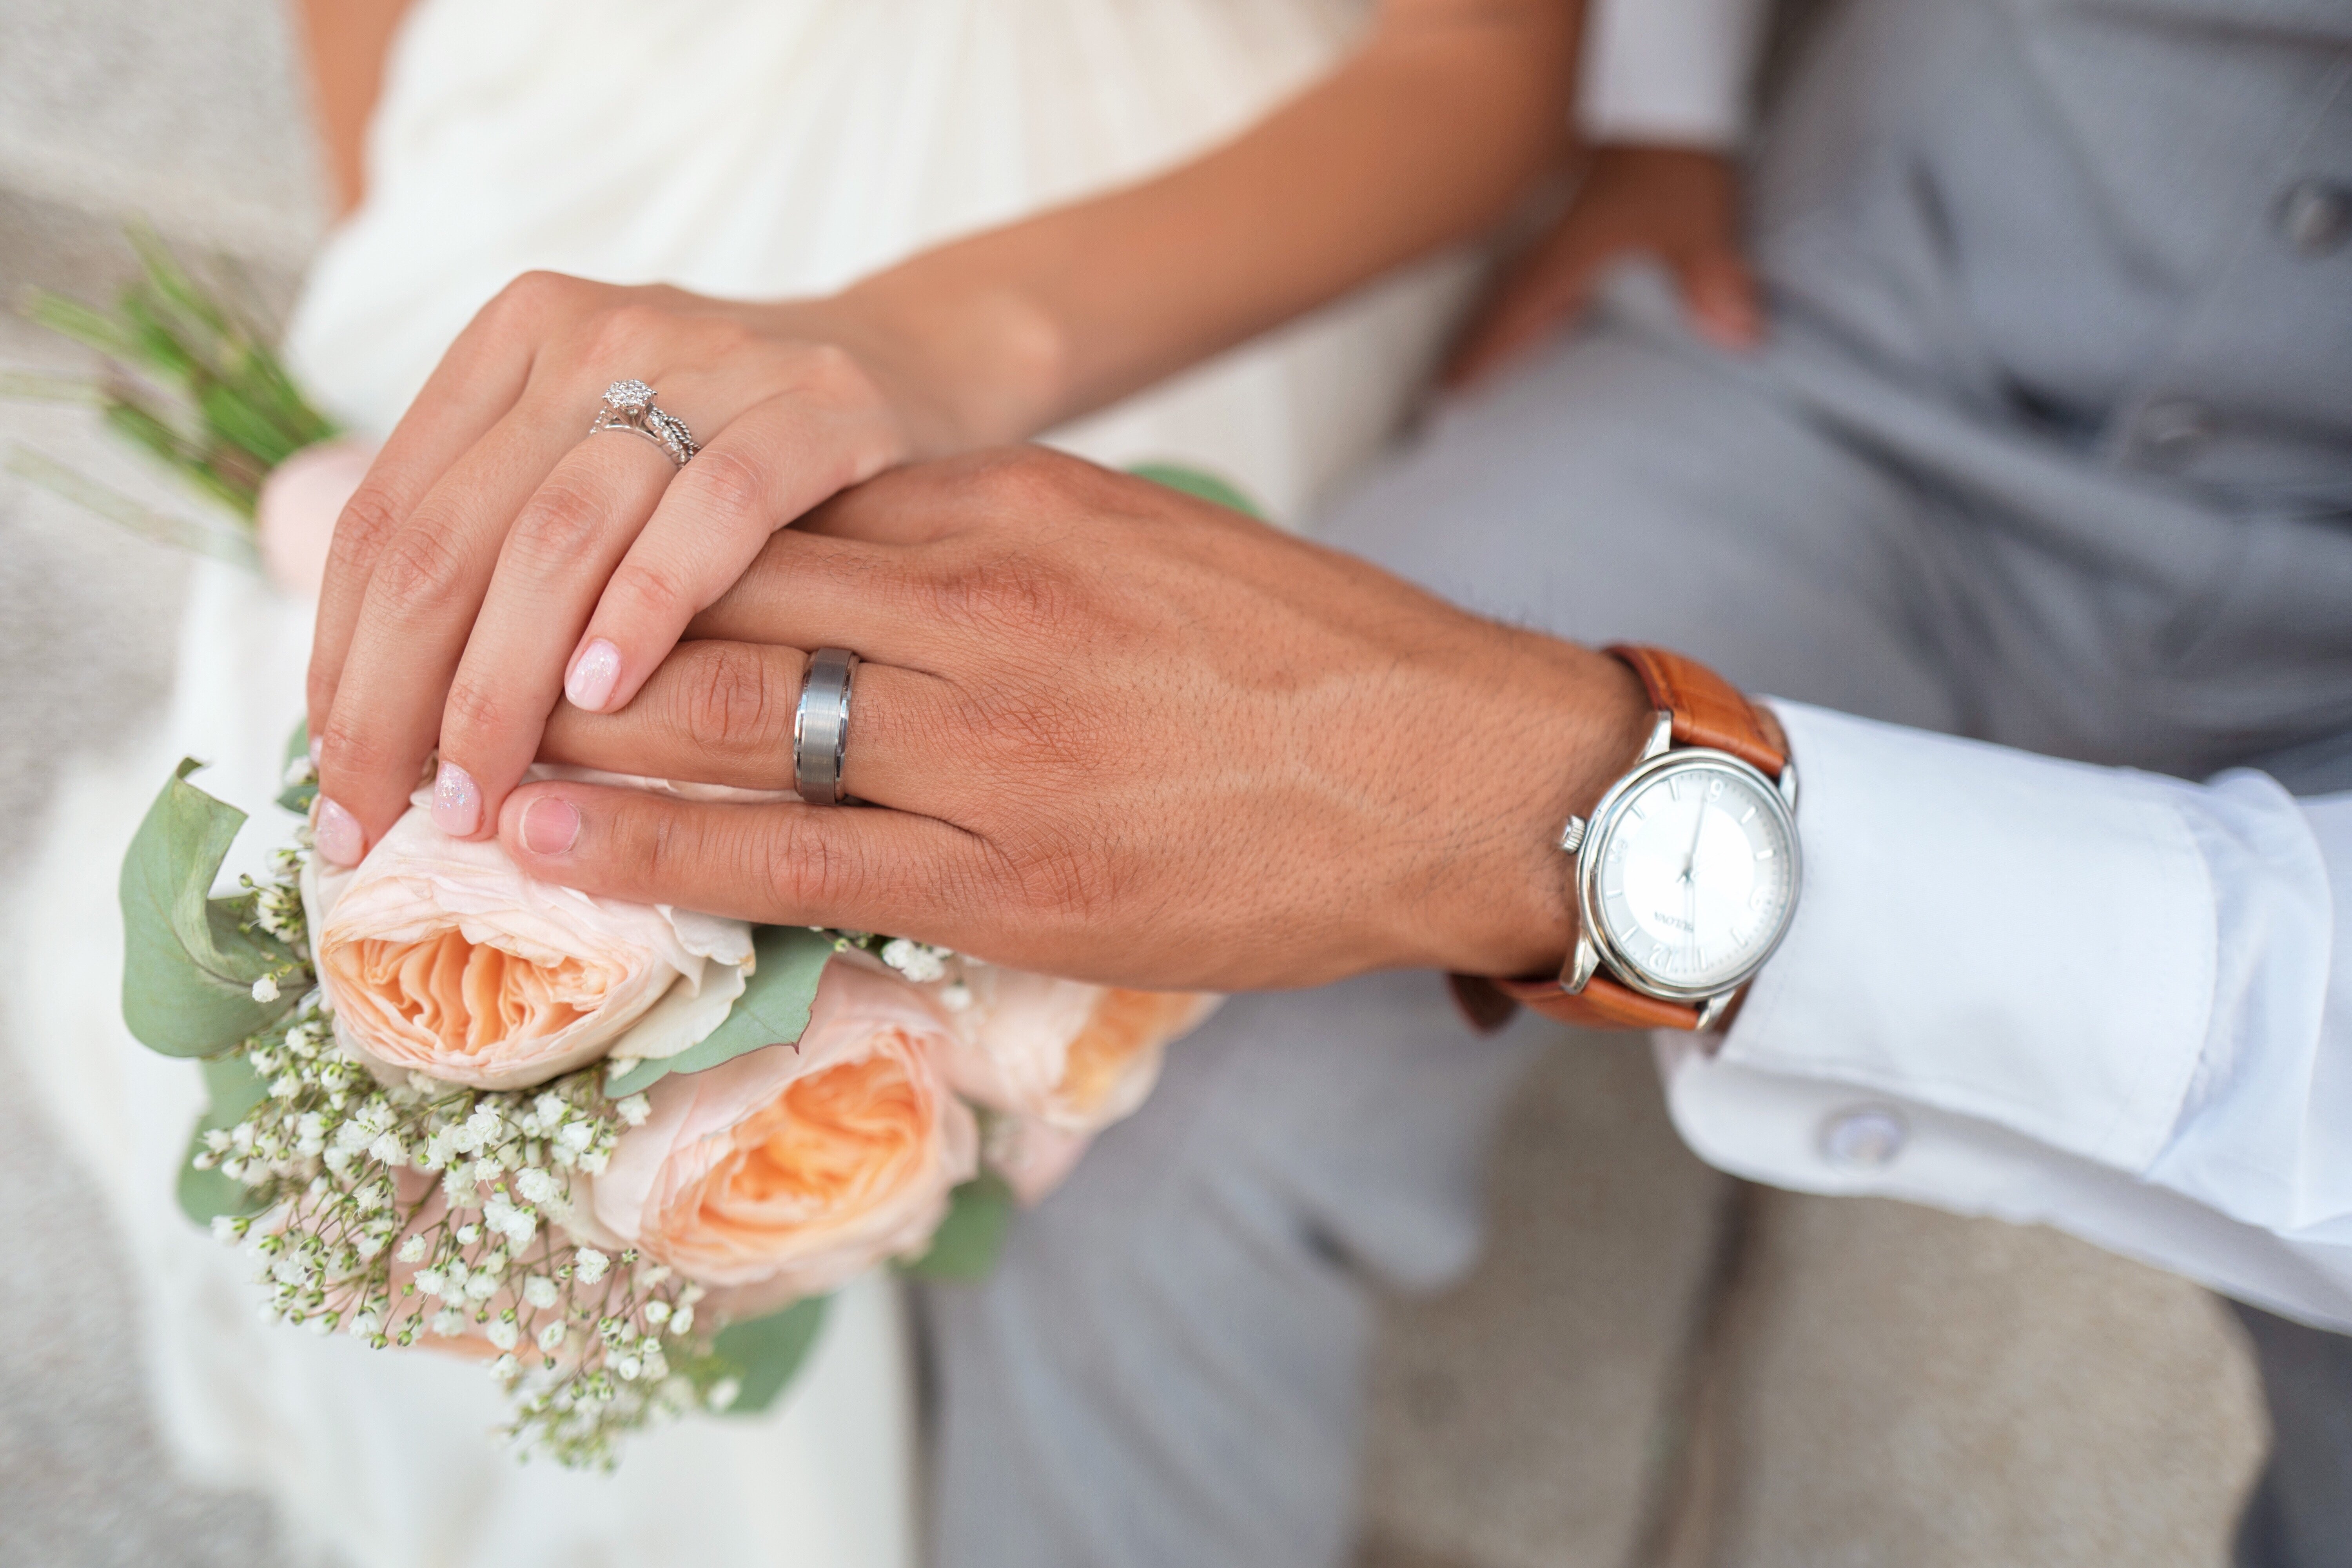 How Does a Prenup Work and Should You Get One?